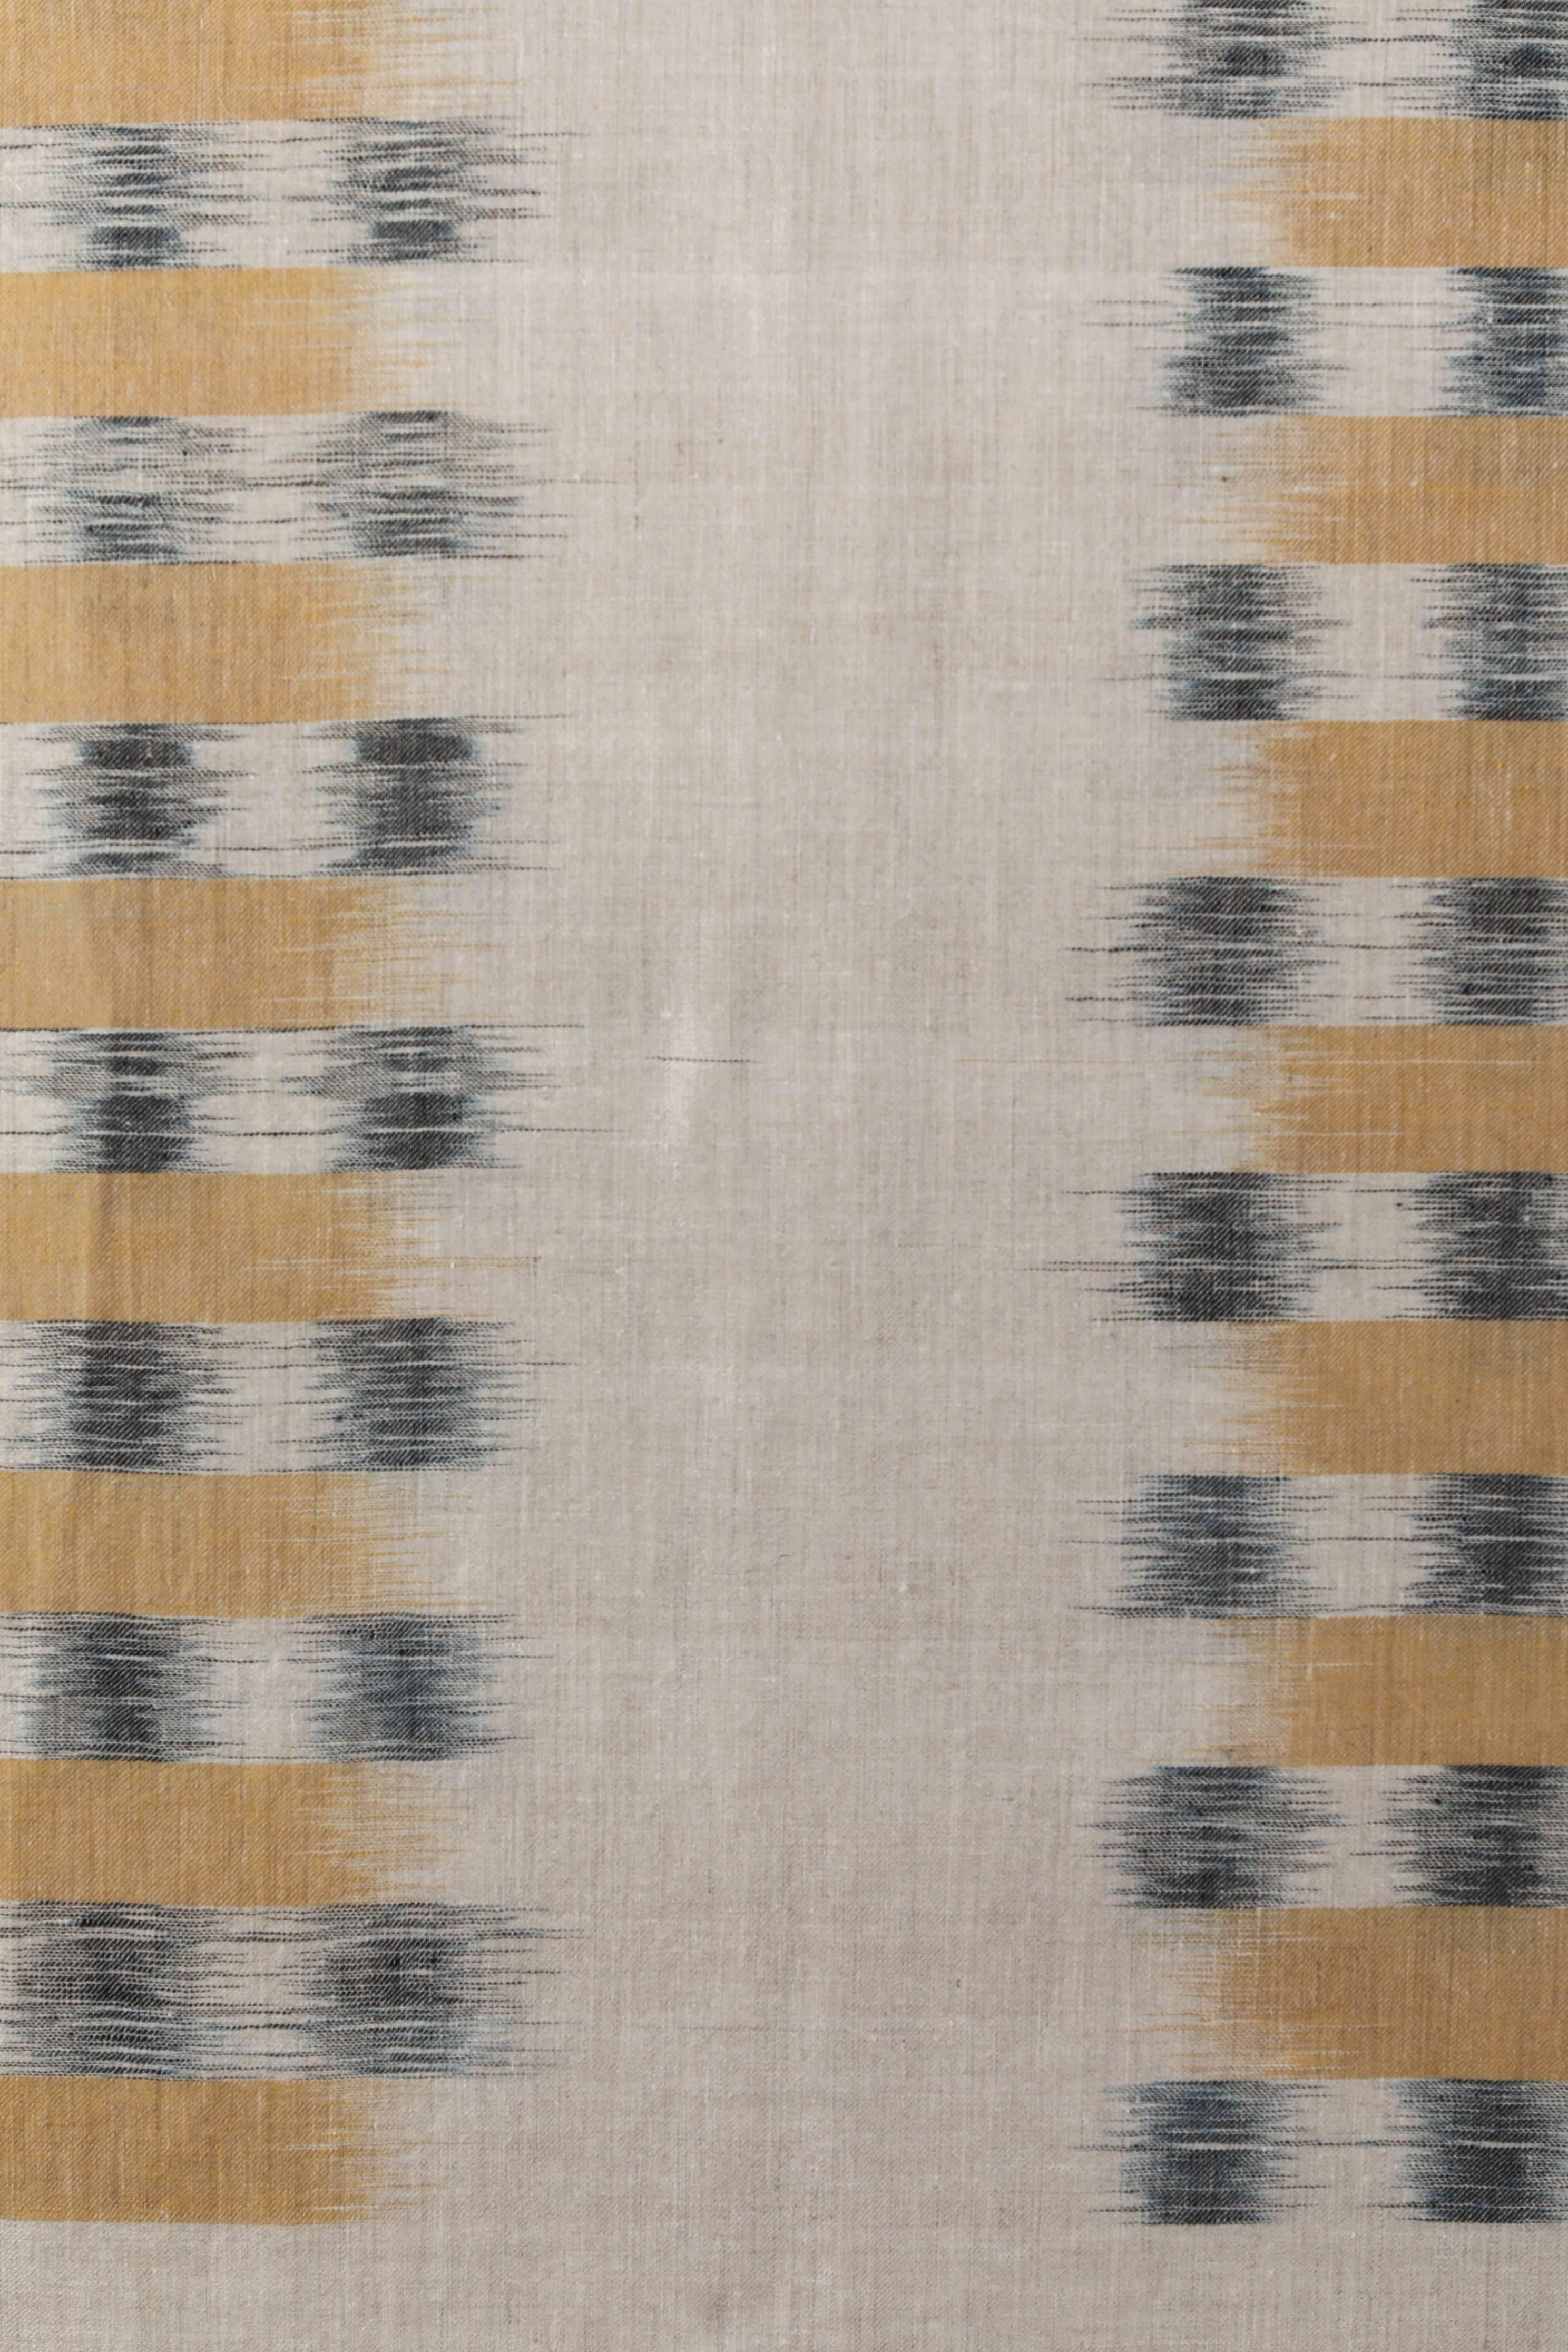 Pat McGann Workshop
Contemporary extra fine Ikat weave throw handwoven in Kashmir, India.